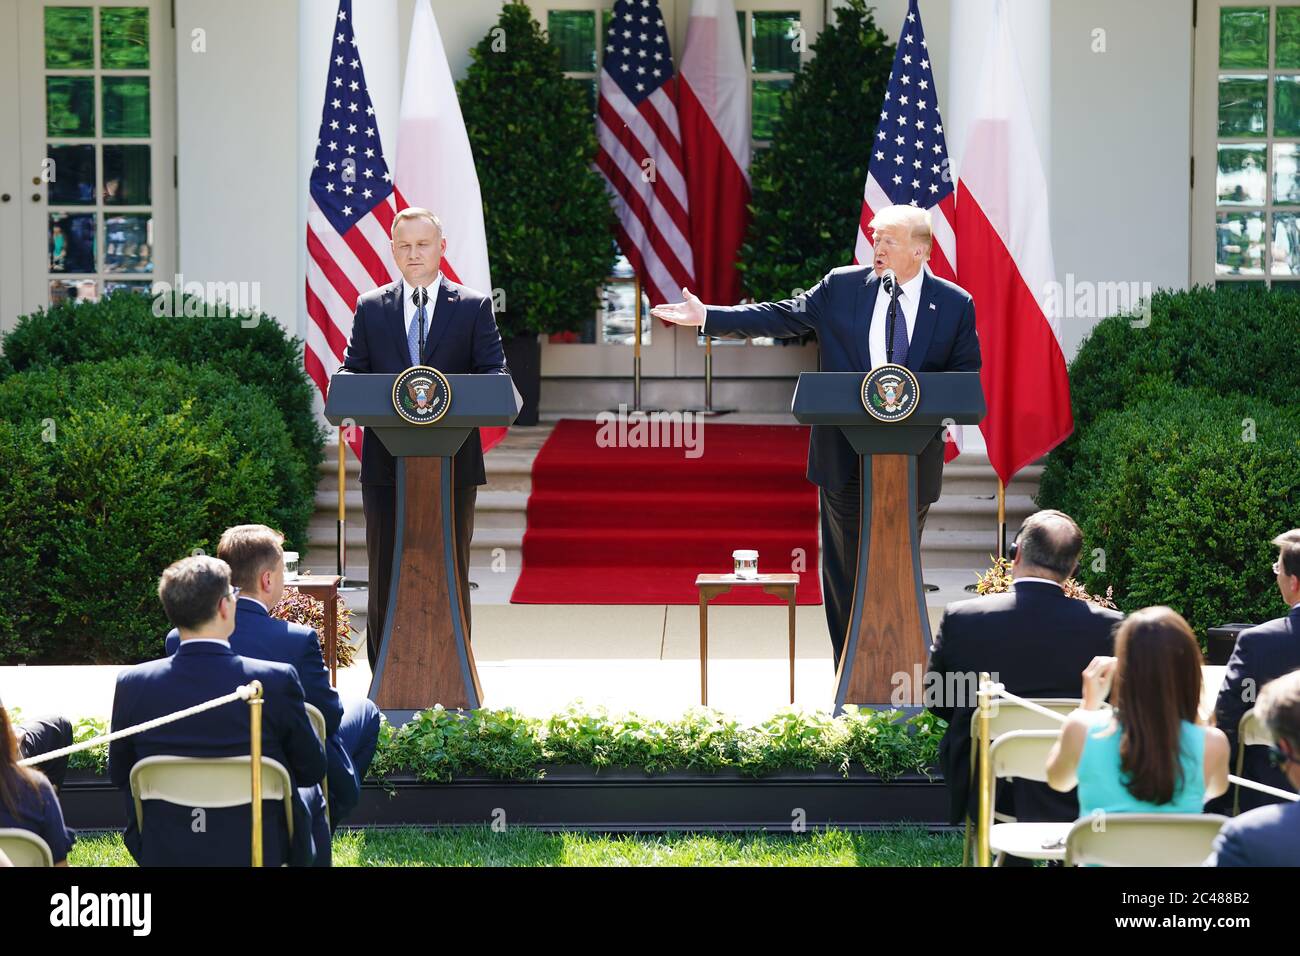 US President Donald J. Trump (R) and Polish President Andrzej Duda hold a joint press conference in the Rose Garden of the White House in Washington, DC, USA, 24 June 2020. Duda, a conservative nationalist facing a tight re-election race back home, is the first foreign leader to visit the White House in more than three months.Credit: Jim LoScalzo/Pool via CNP /MediaPunch Stock Photo